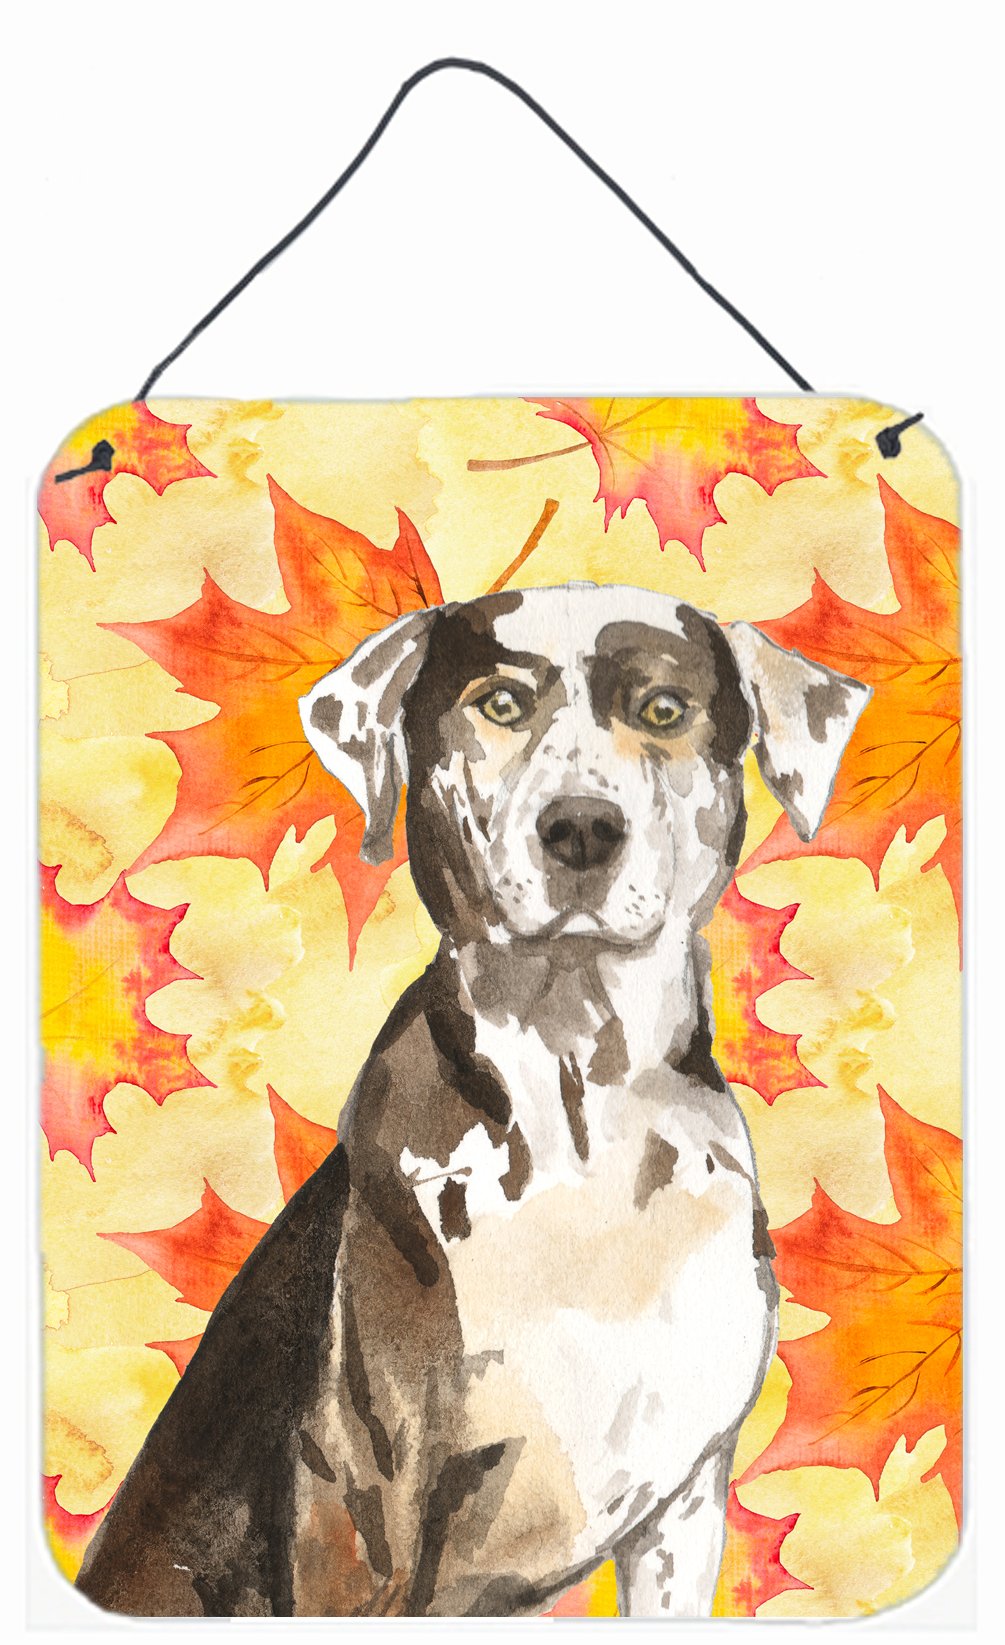 Fall Leaves Catahoula Leopard Dog Wall or Door Hanging Prints CK1845DS1216 by Caroline's Treasures